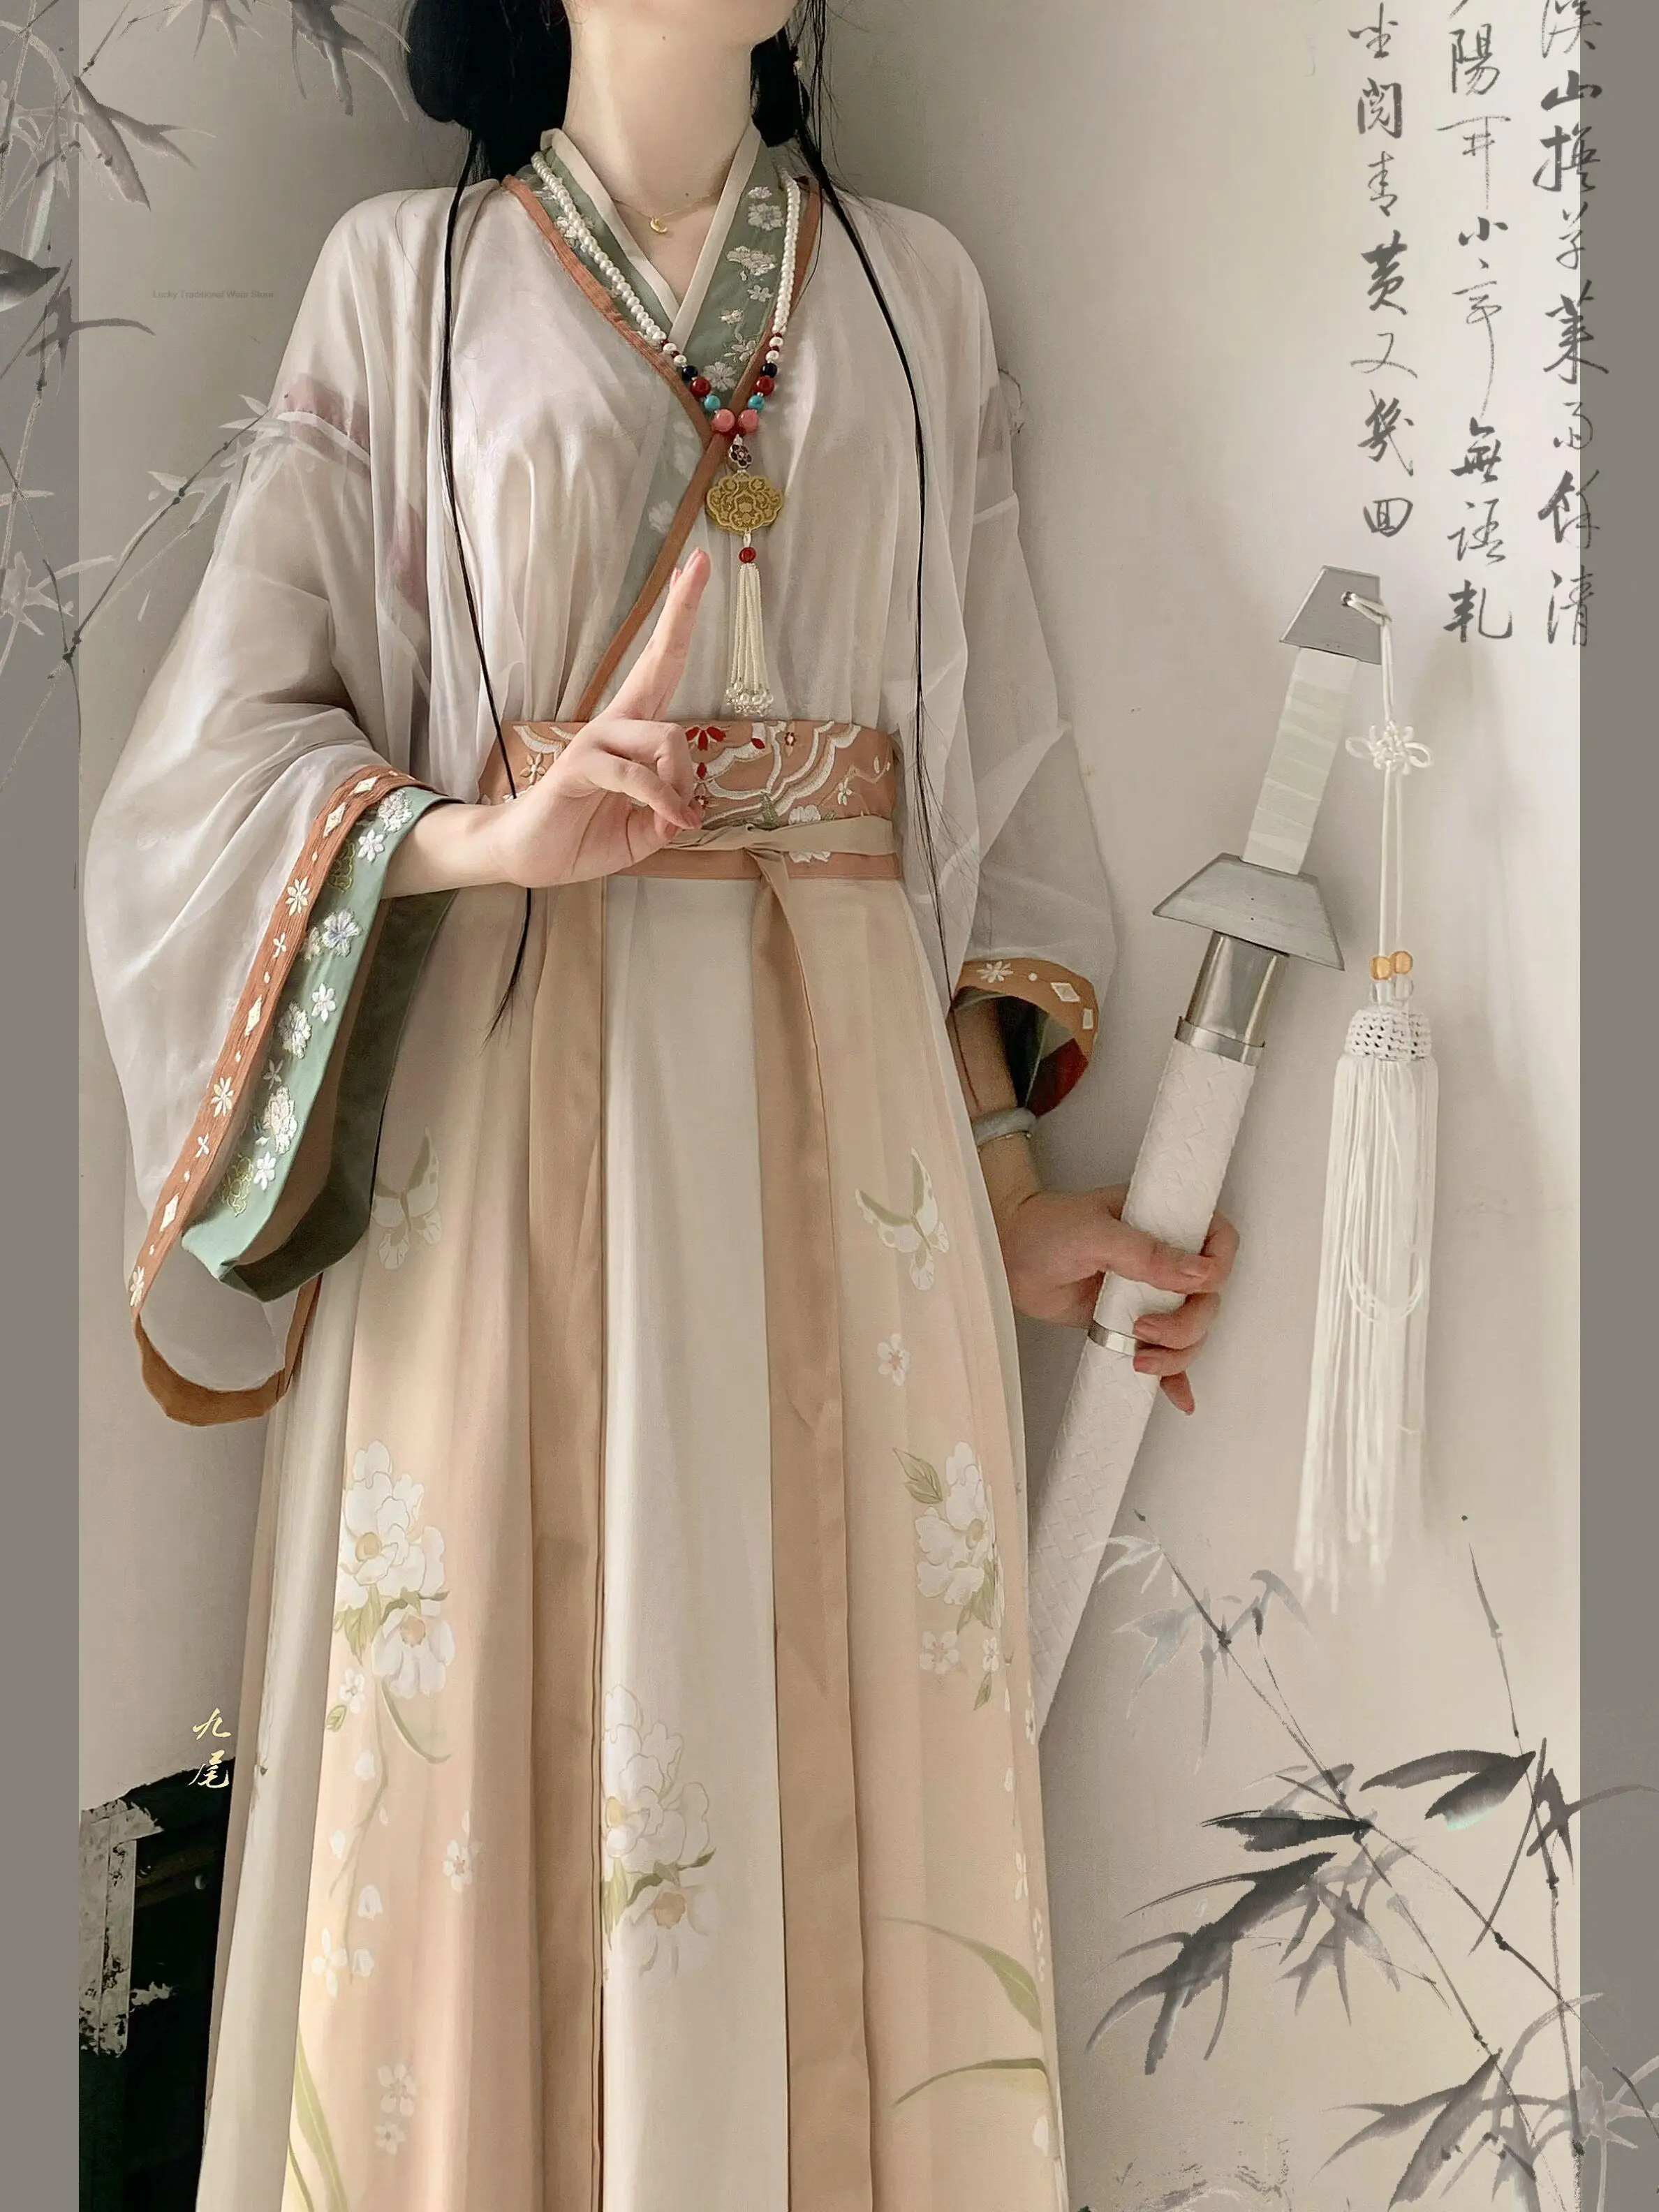 Hanfu Dress Women Ancient Chinese Traditional Folk Dance Hanfu Set Song Dynasty Female Cosplay Costume Vintage Party Outfit T1 chinese mulberry paper chinese ming qing dynasty ancient paper handmade calligraphy painting vintage rice papier rijstpapier